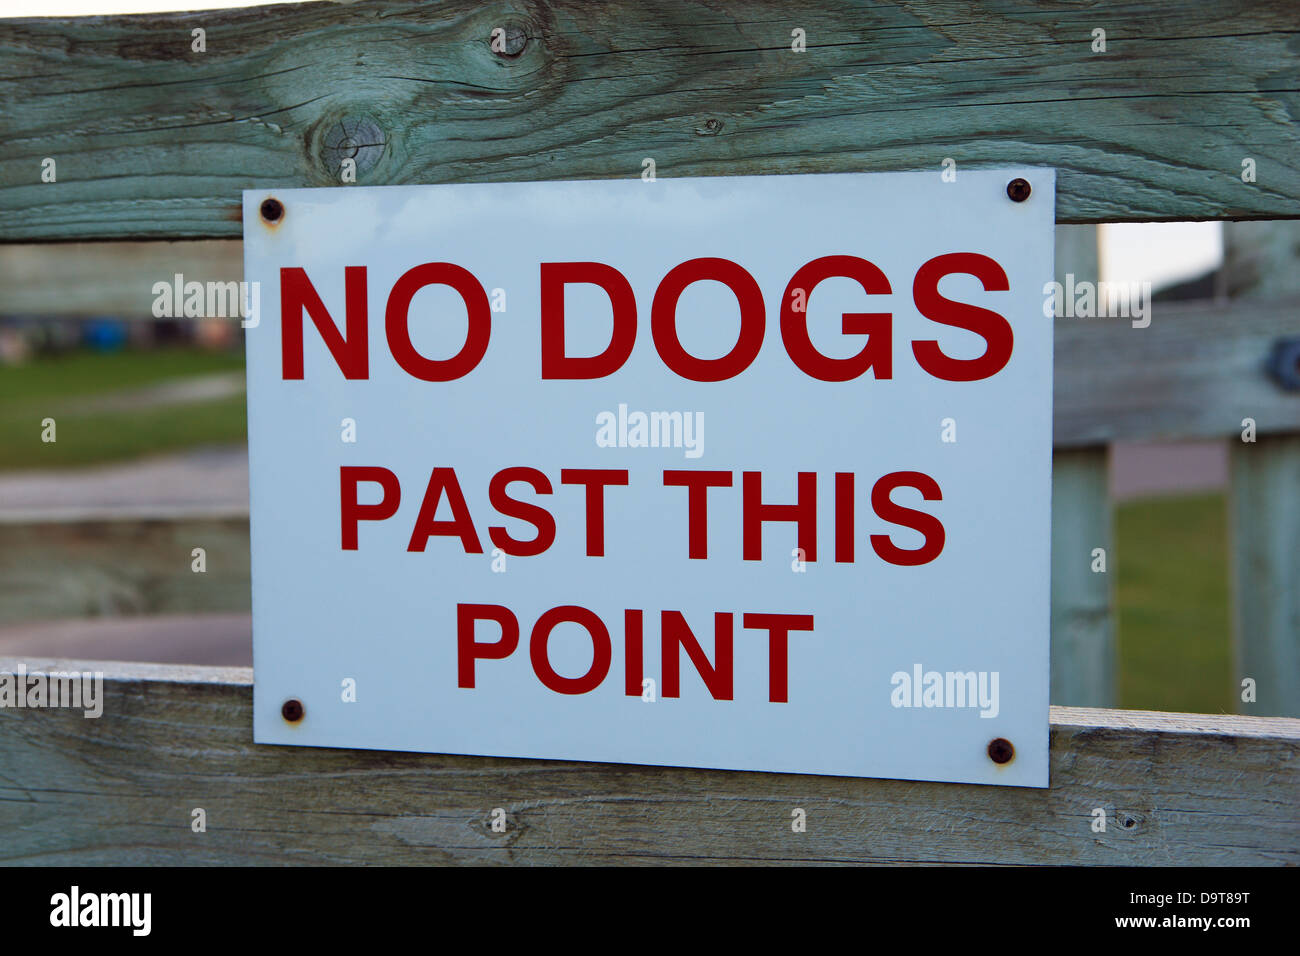 No dogs past this point sign Stock Photo